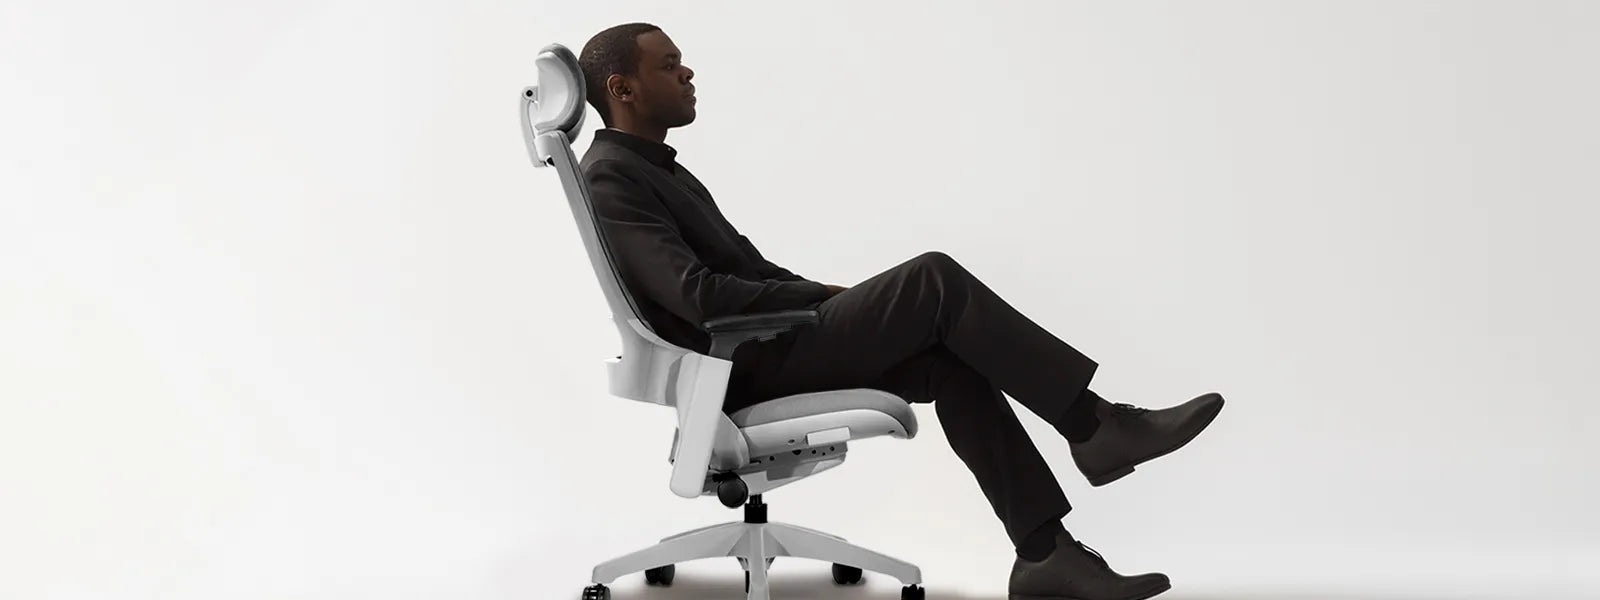 Flujo Angulo Chair showcased with a man seated in comfort, emphasizing the sleek white design and ergonomic back support.